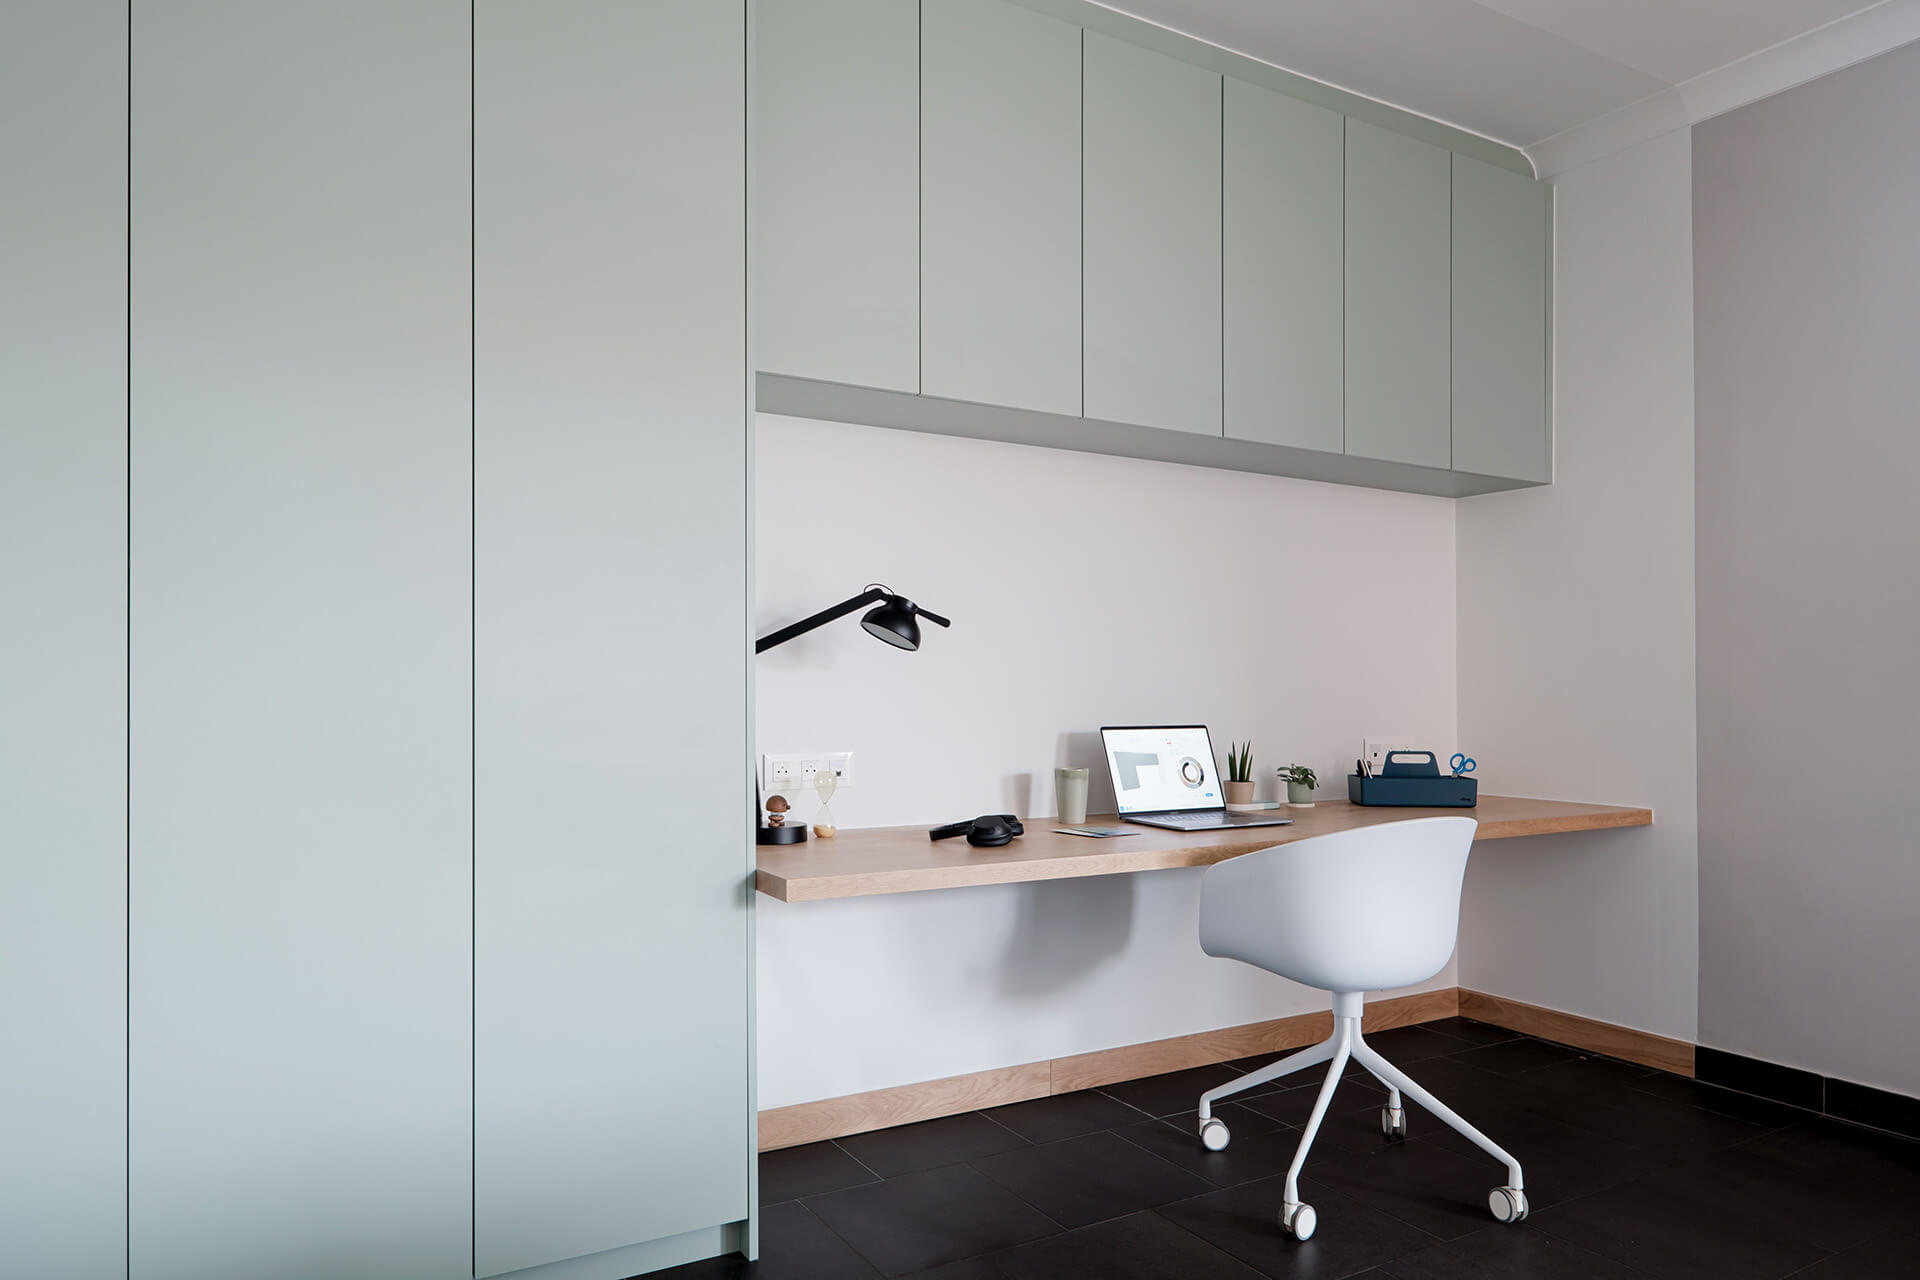 Custom office cabinets for the home workspace in the color Industrial Green.